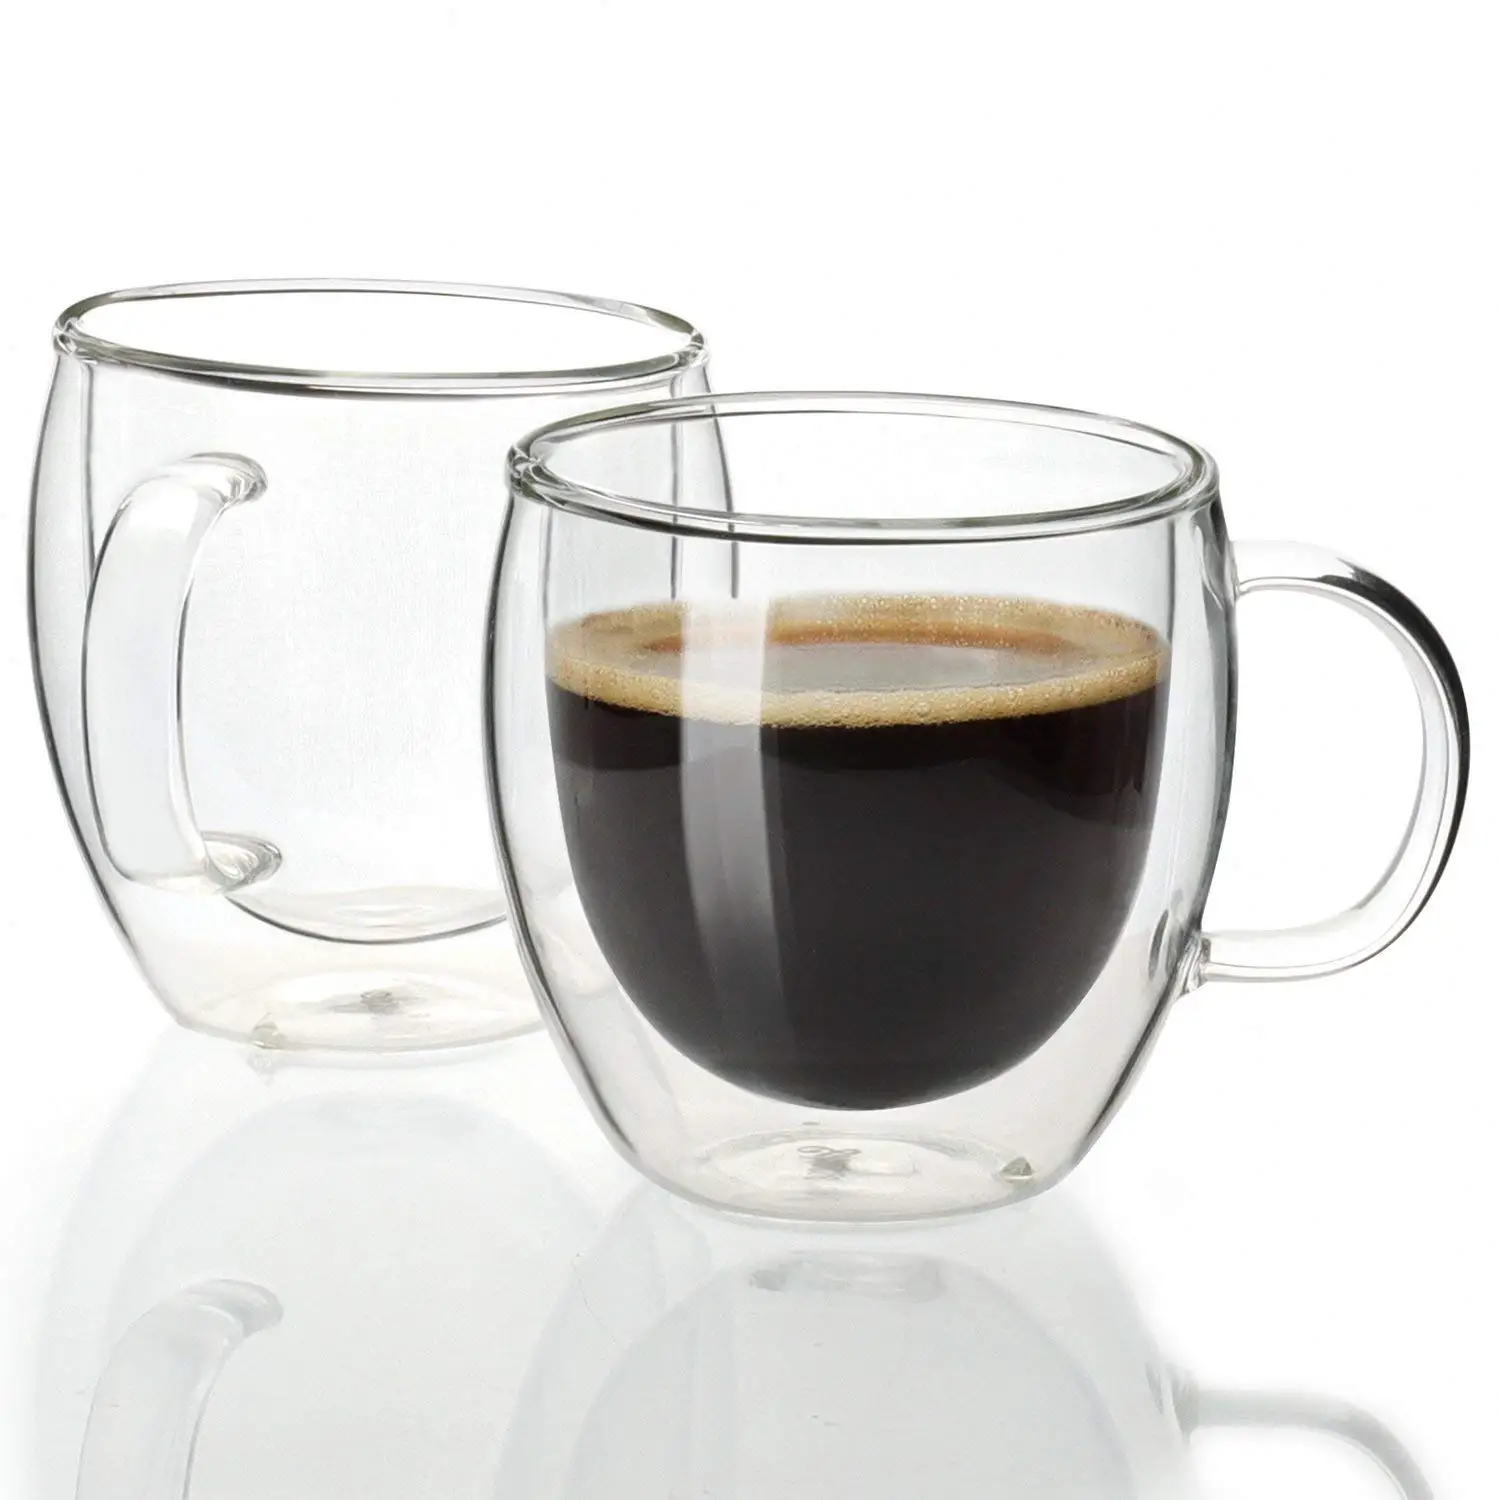 Cups Mugs And Saucers Tabletop Teemall Double Wall Insulated Glass Espresso Tea Mugs 200ml Set Of